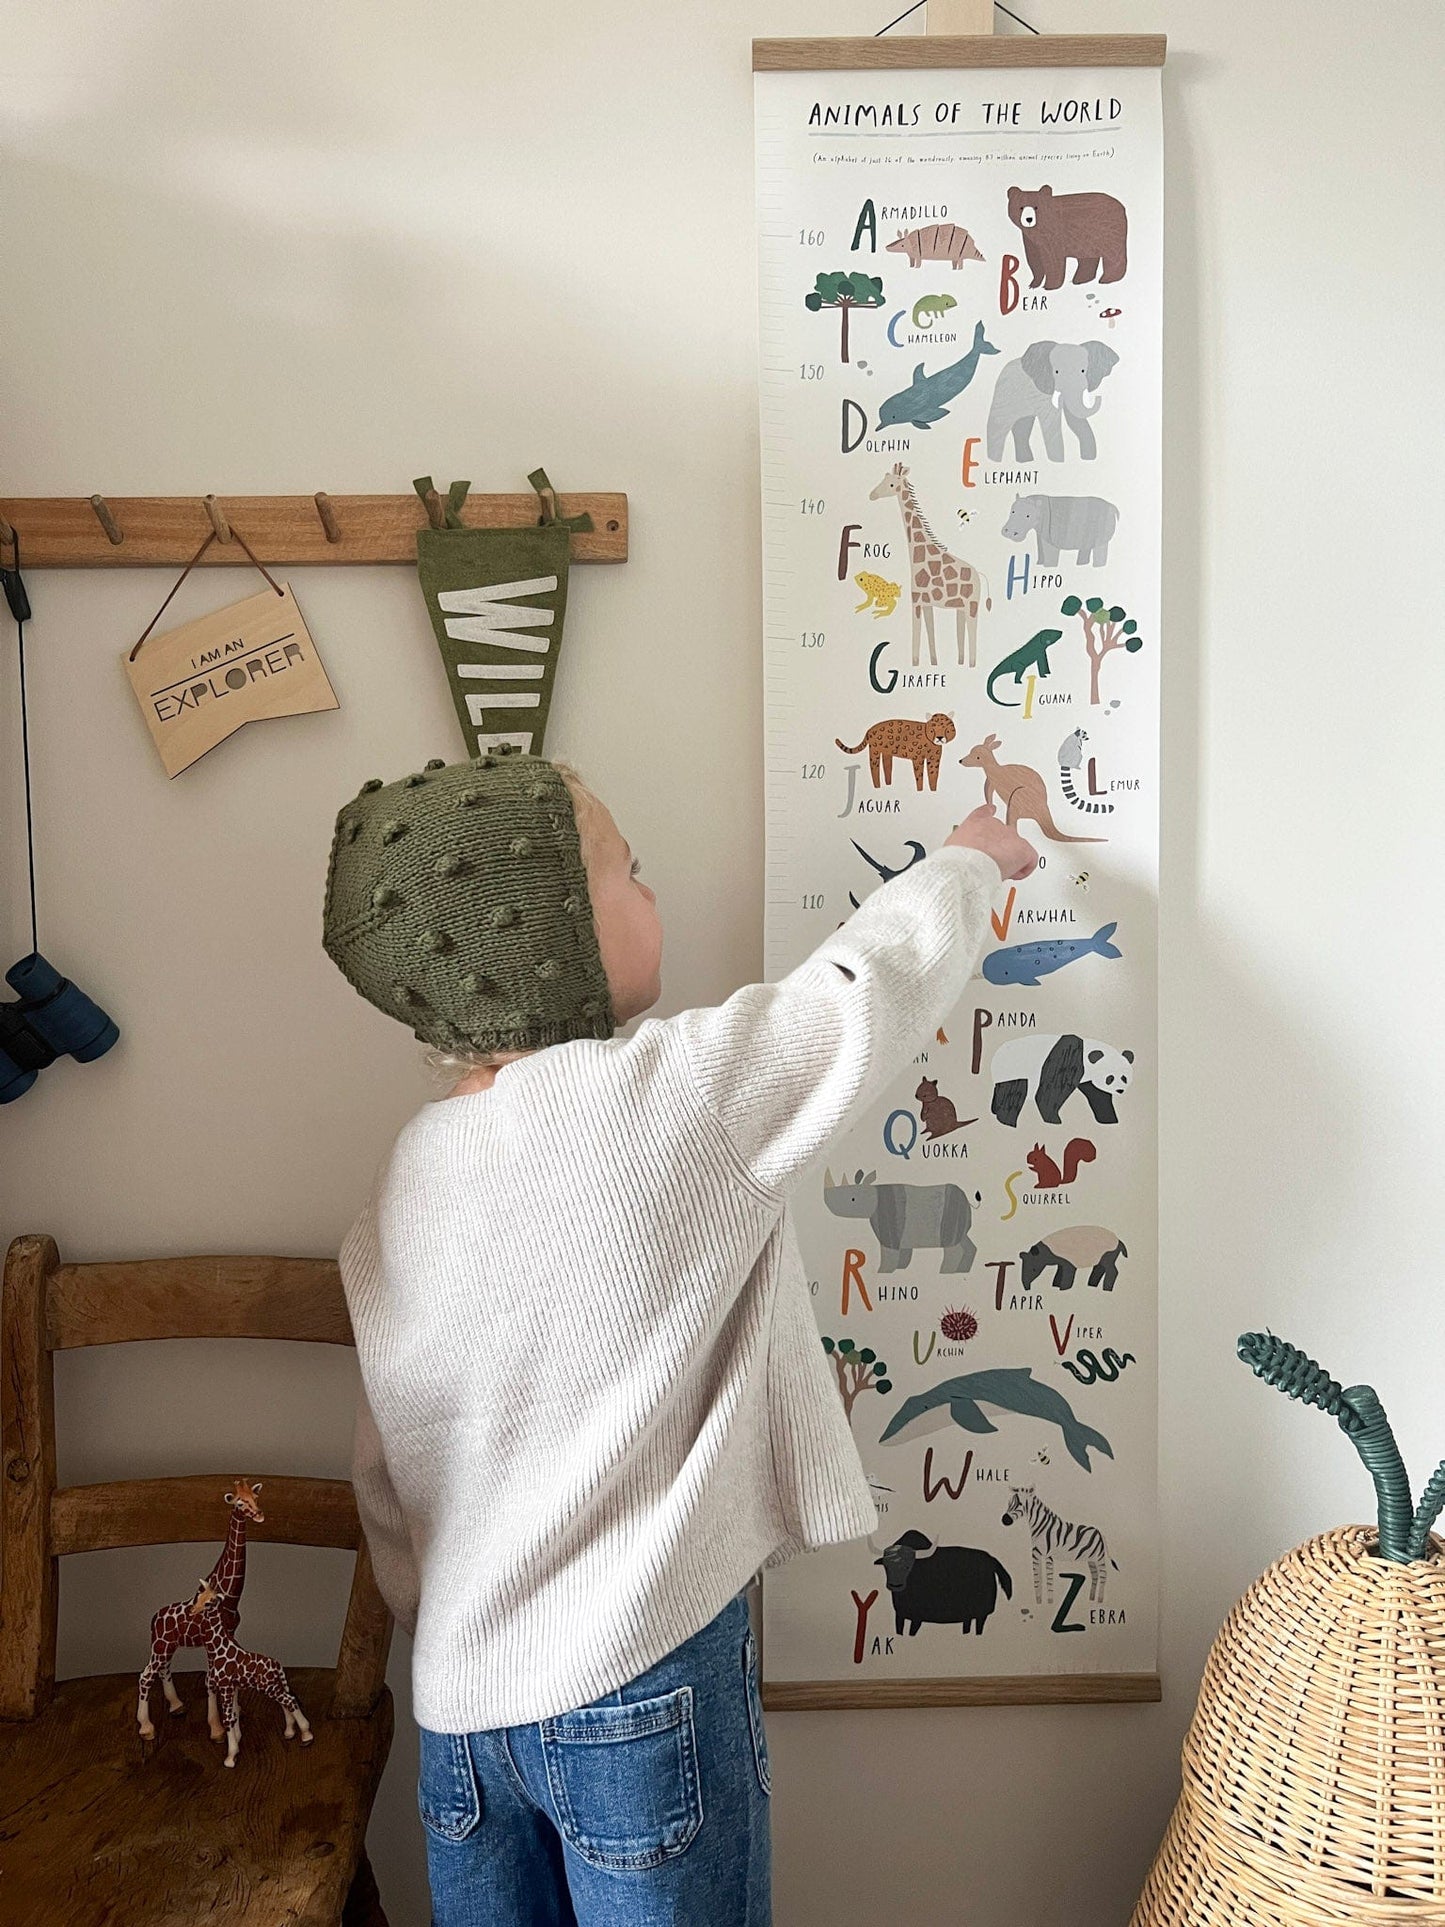 Child pointing at the kangaroo on the Animals of the world height chart in a solid oak hanger on a wall next to wooden vintage coat hooks with a wild flag hanging from it, next to a vintage wooden kids chair with a denim jacket hanging over it and a ferm living pear basket.